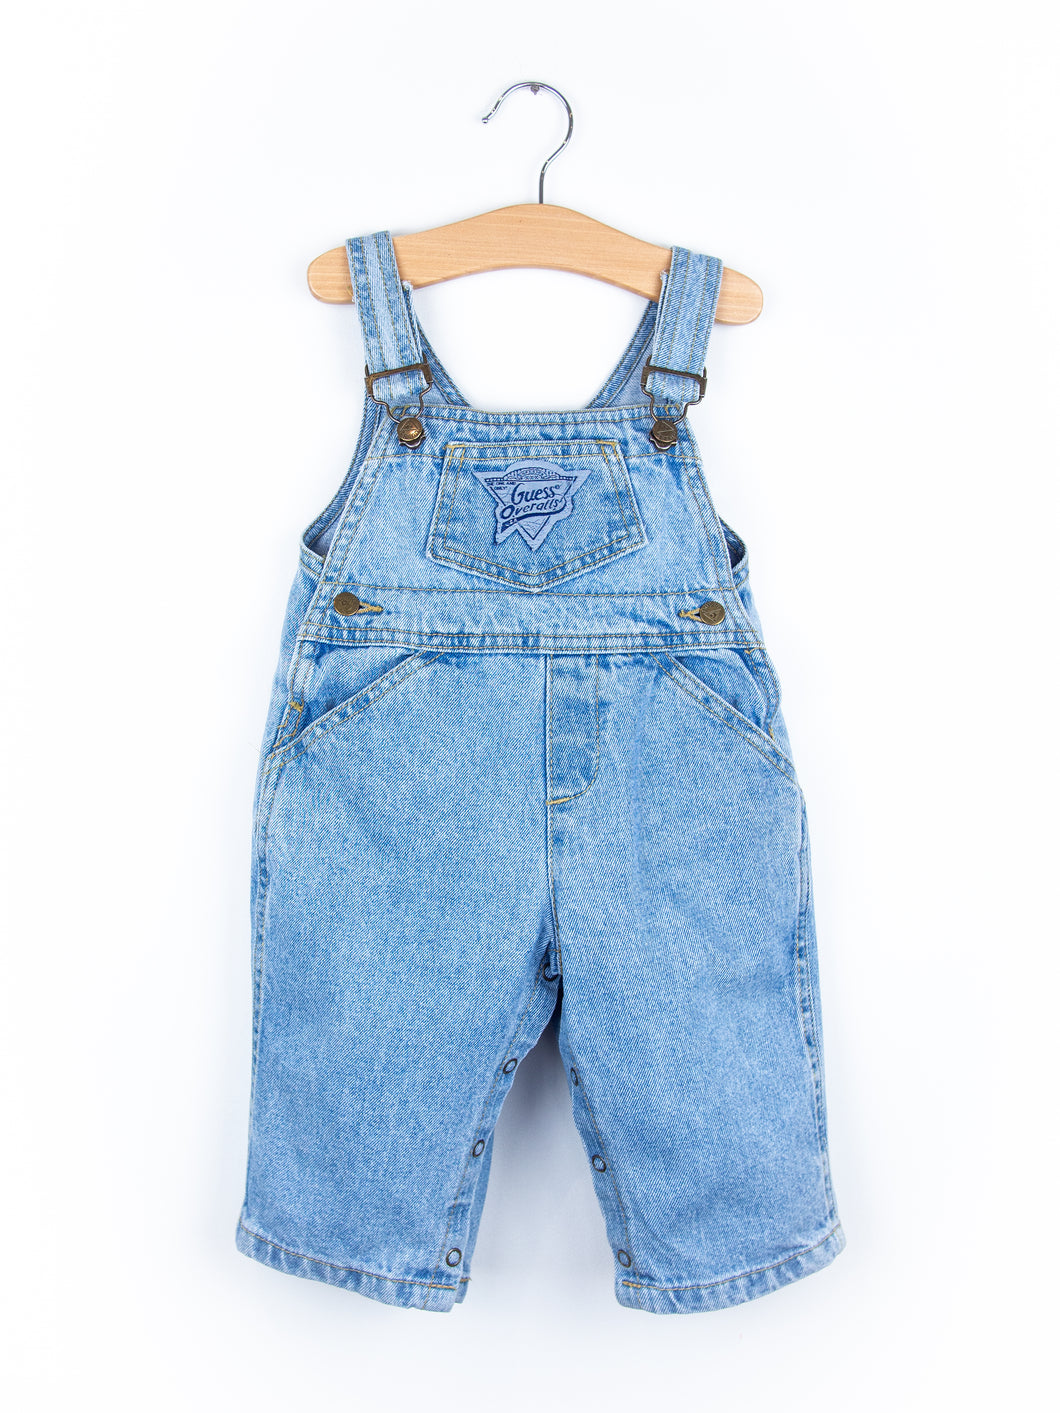 Guess Denim Dungarees - Age 6-9 months